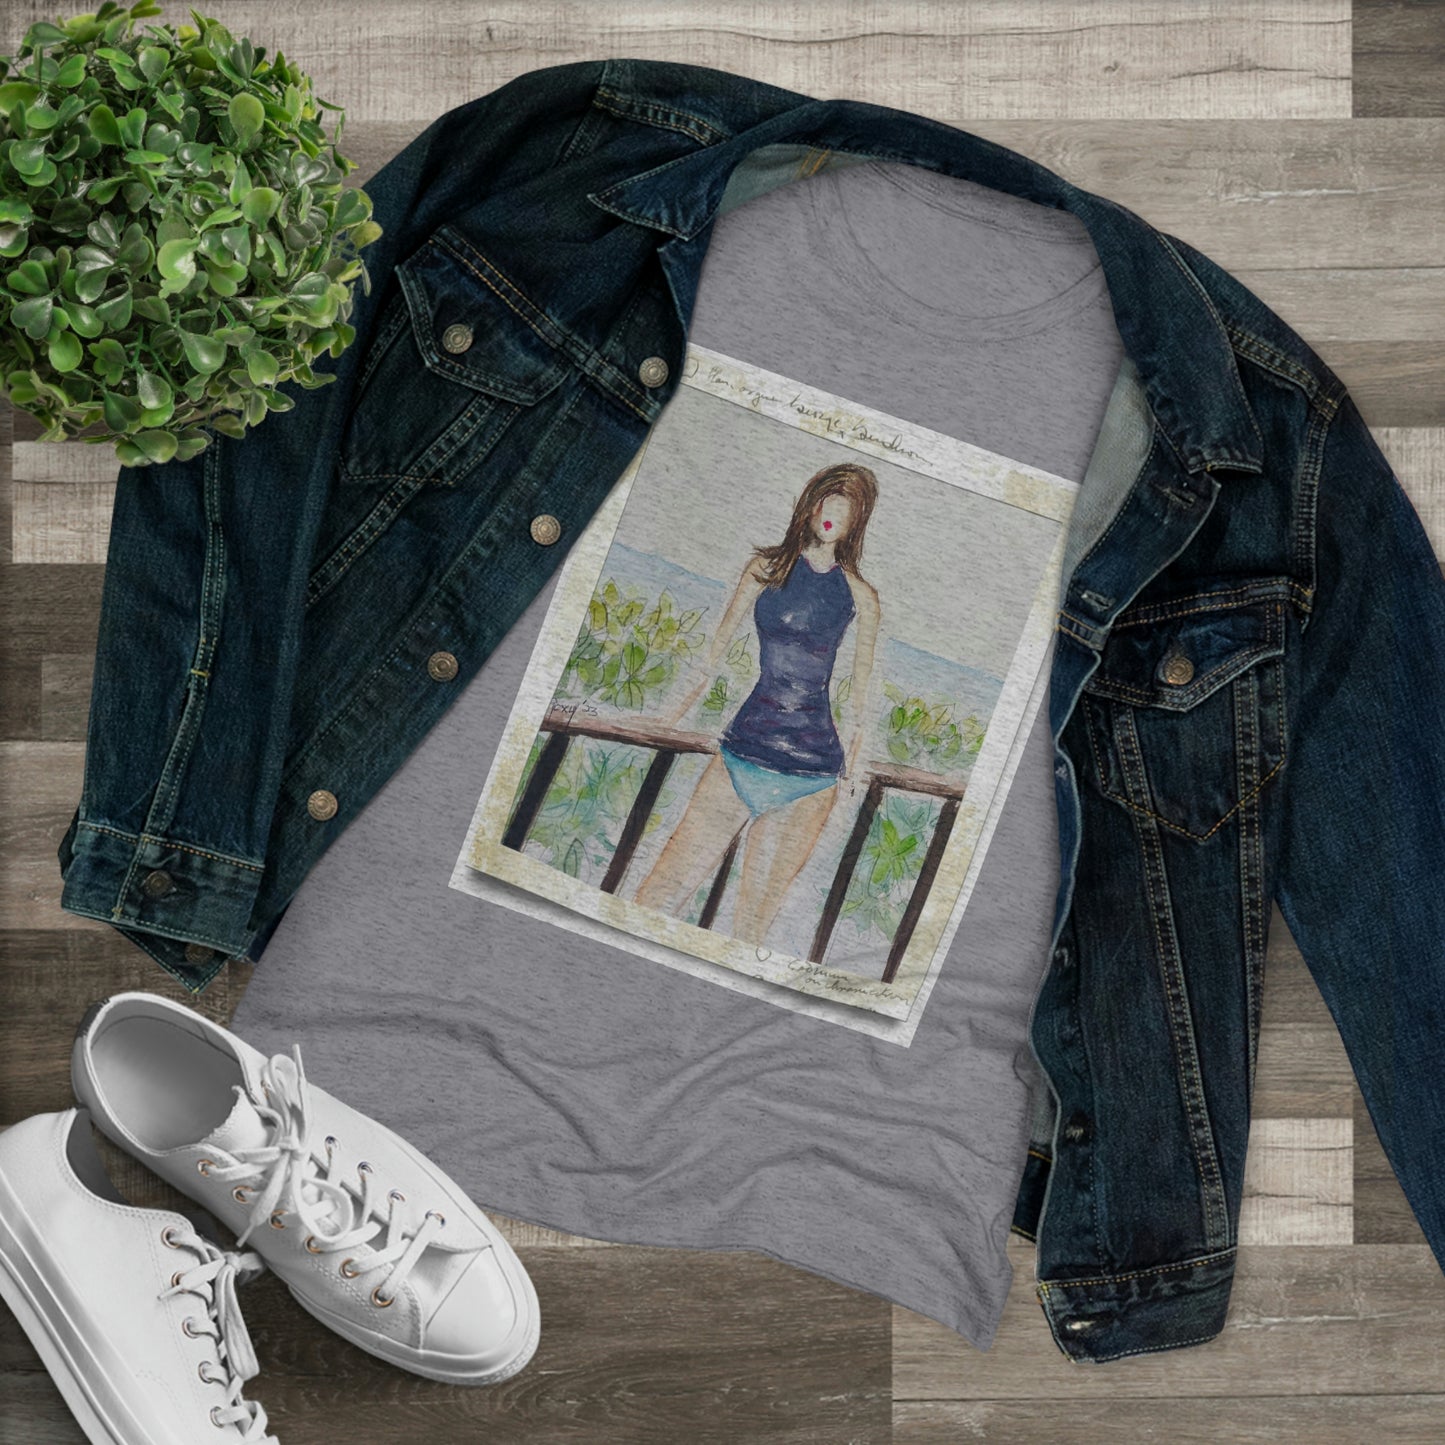 Meet you at the Beach- Women's fitted Triblend Tee  tee shirt